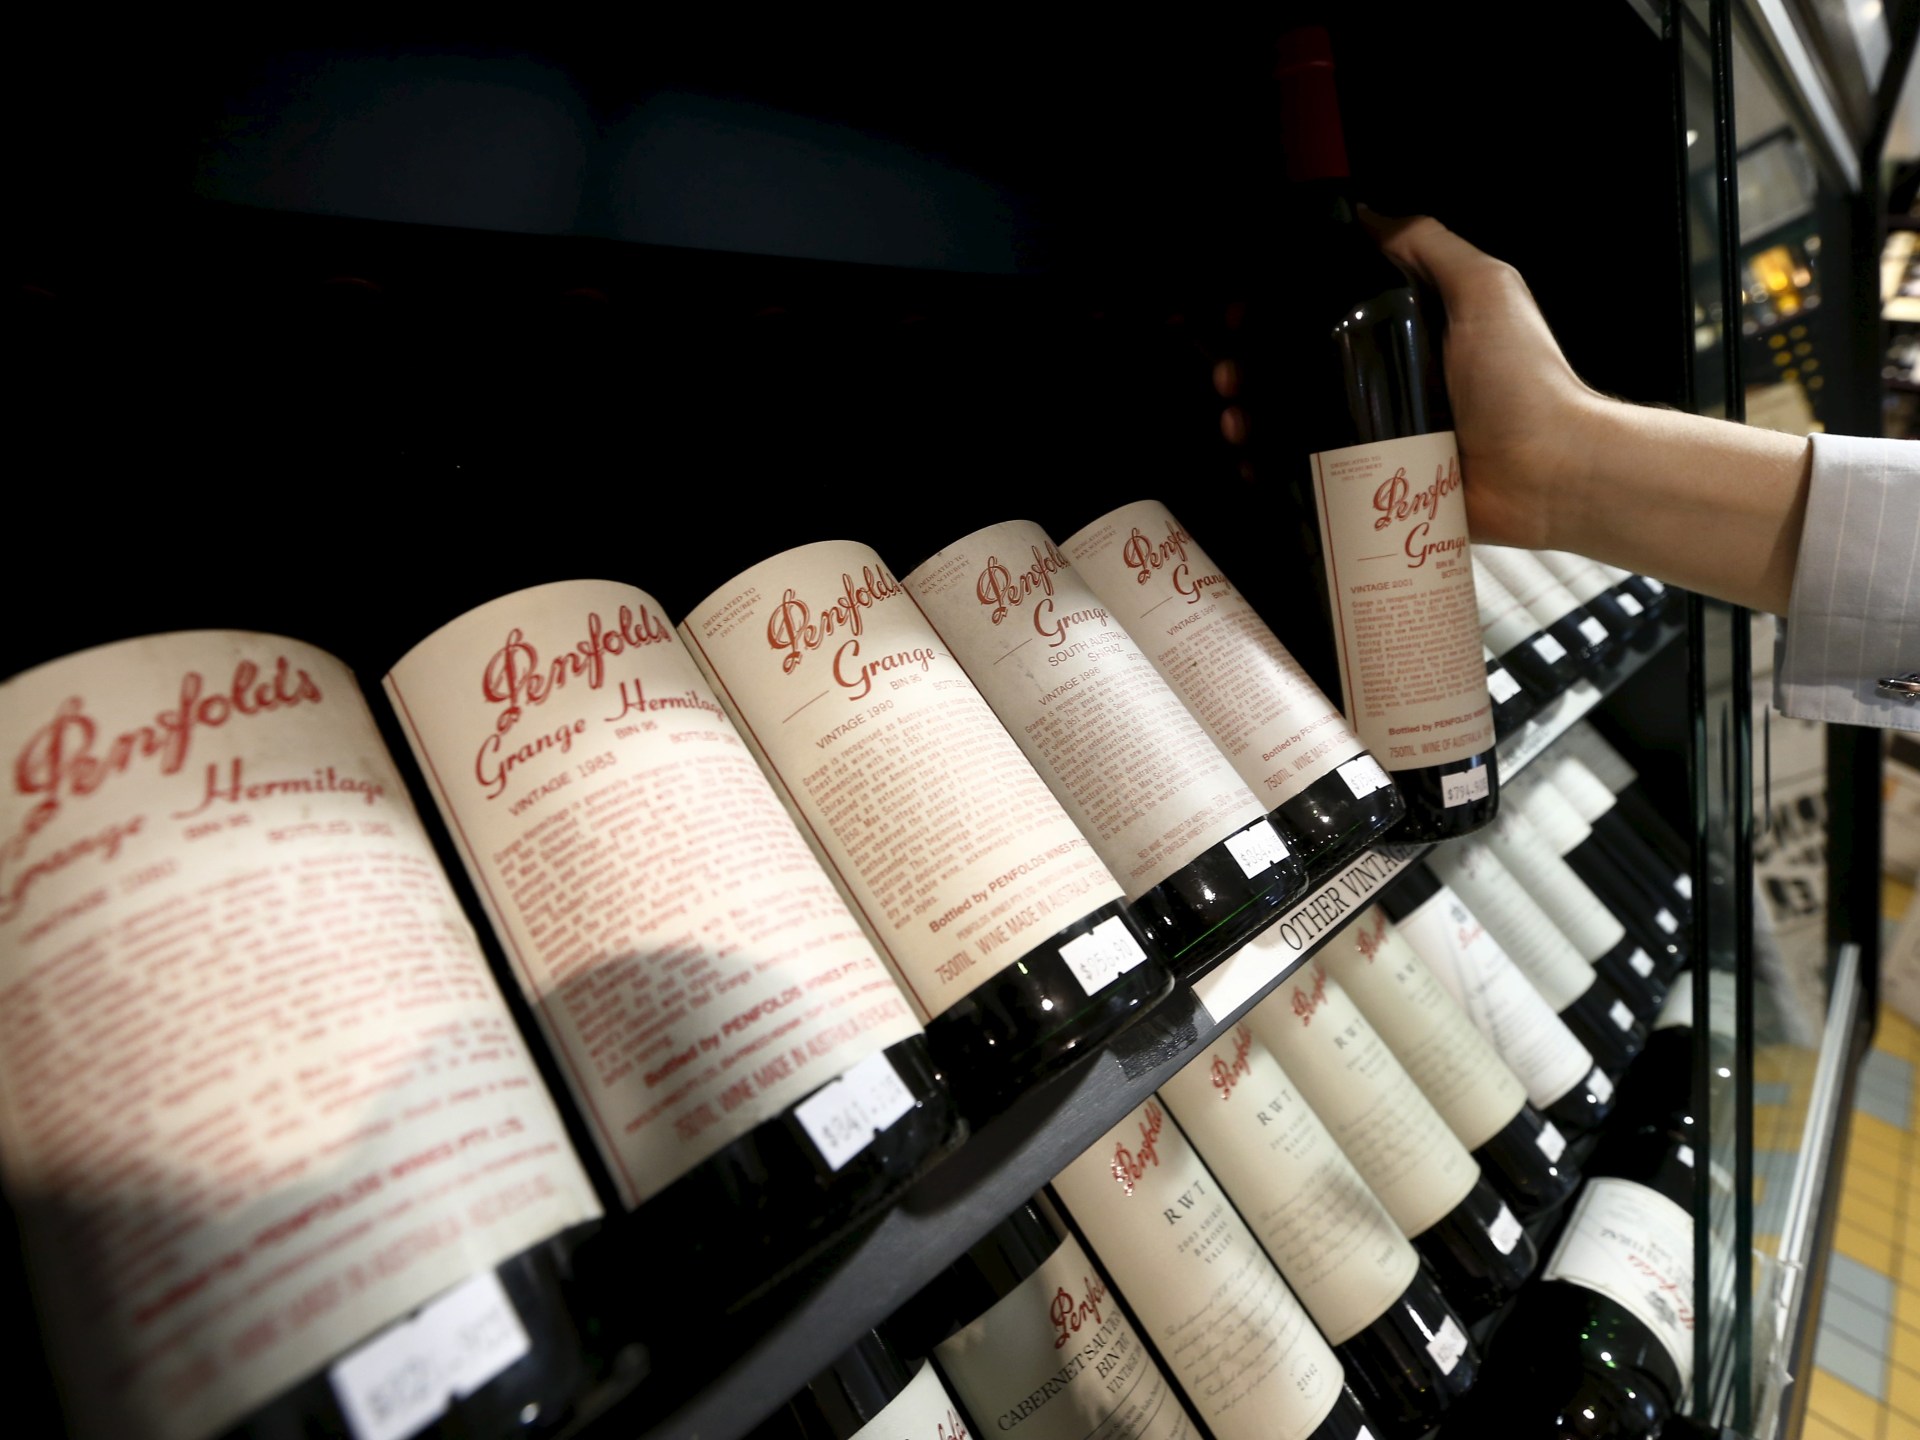 China lifts steep Australian wine tariffs as relations improve | Business and Economy News